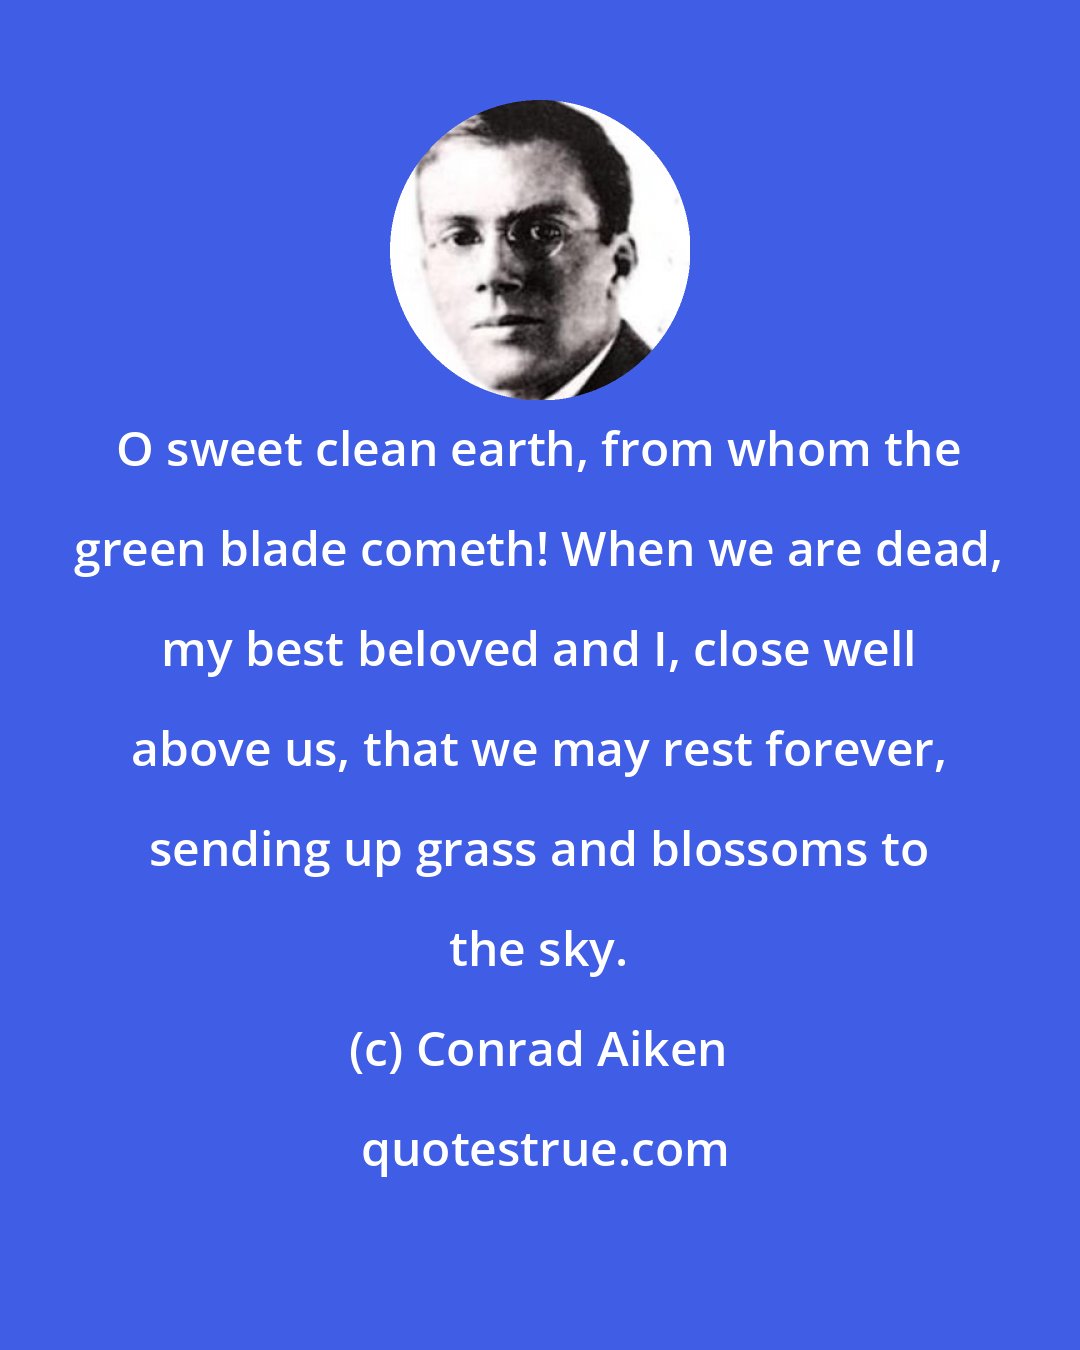 Conrad Aiken: O sweet clean earth, from whom the green blade cometh! When we are dead, my best beloved and I, close well above us, that we may rest forever, sending up grass and blossoms to the sky.